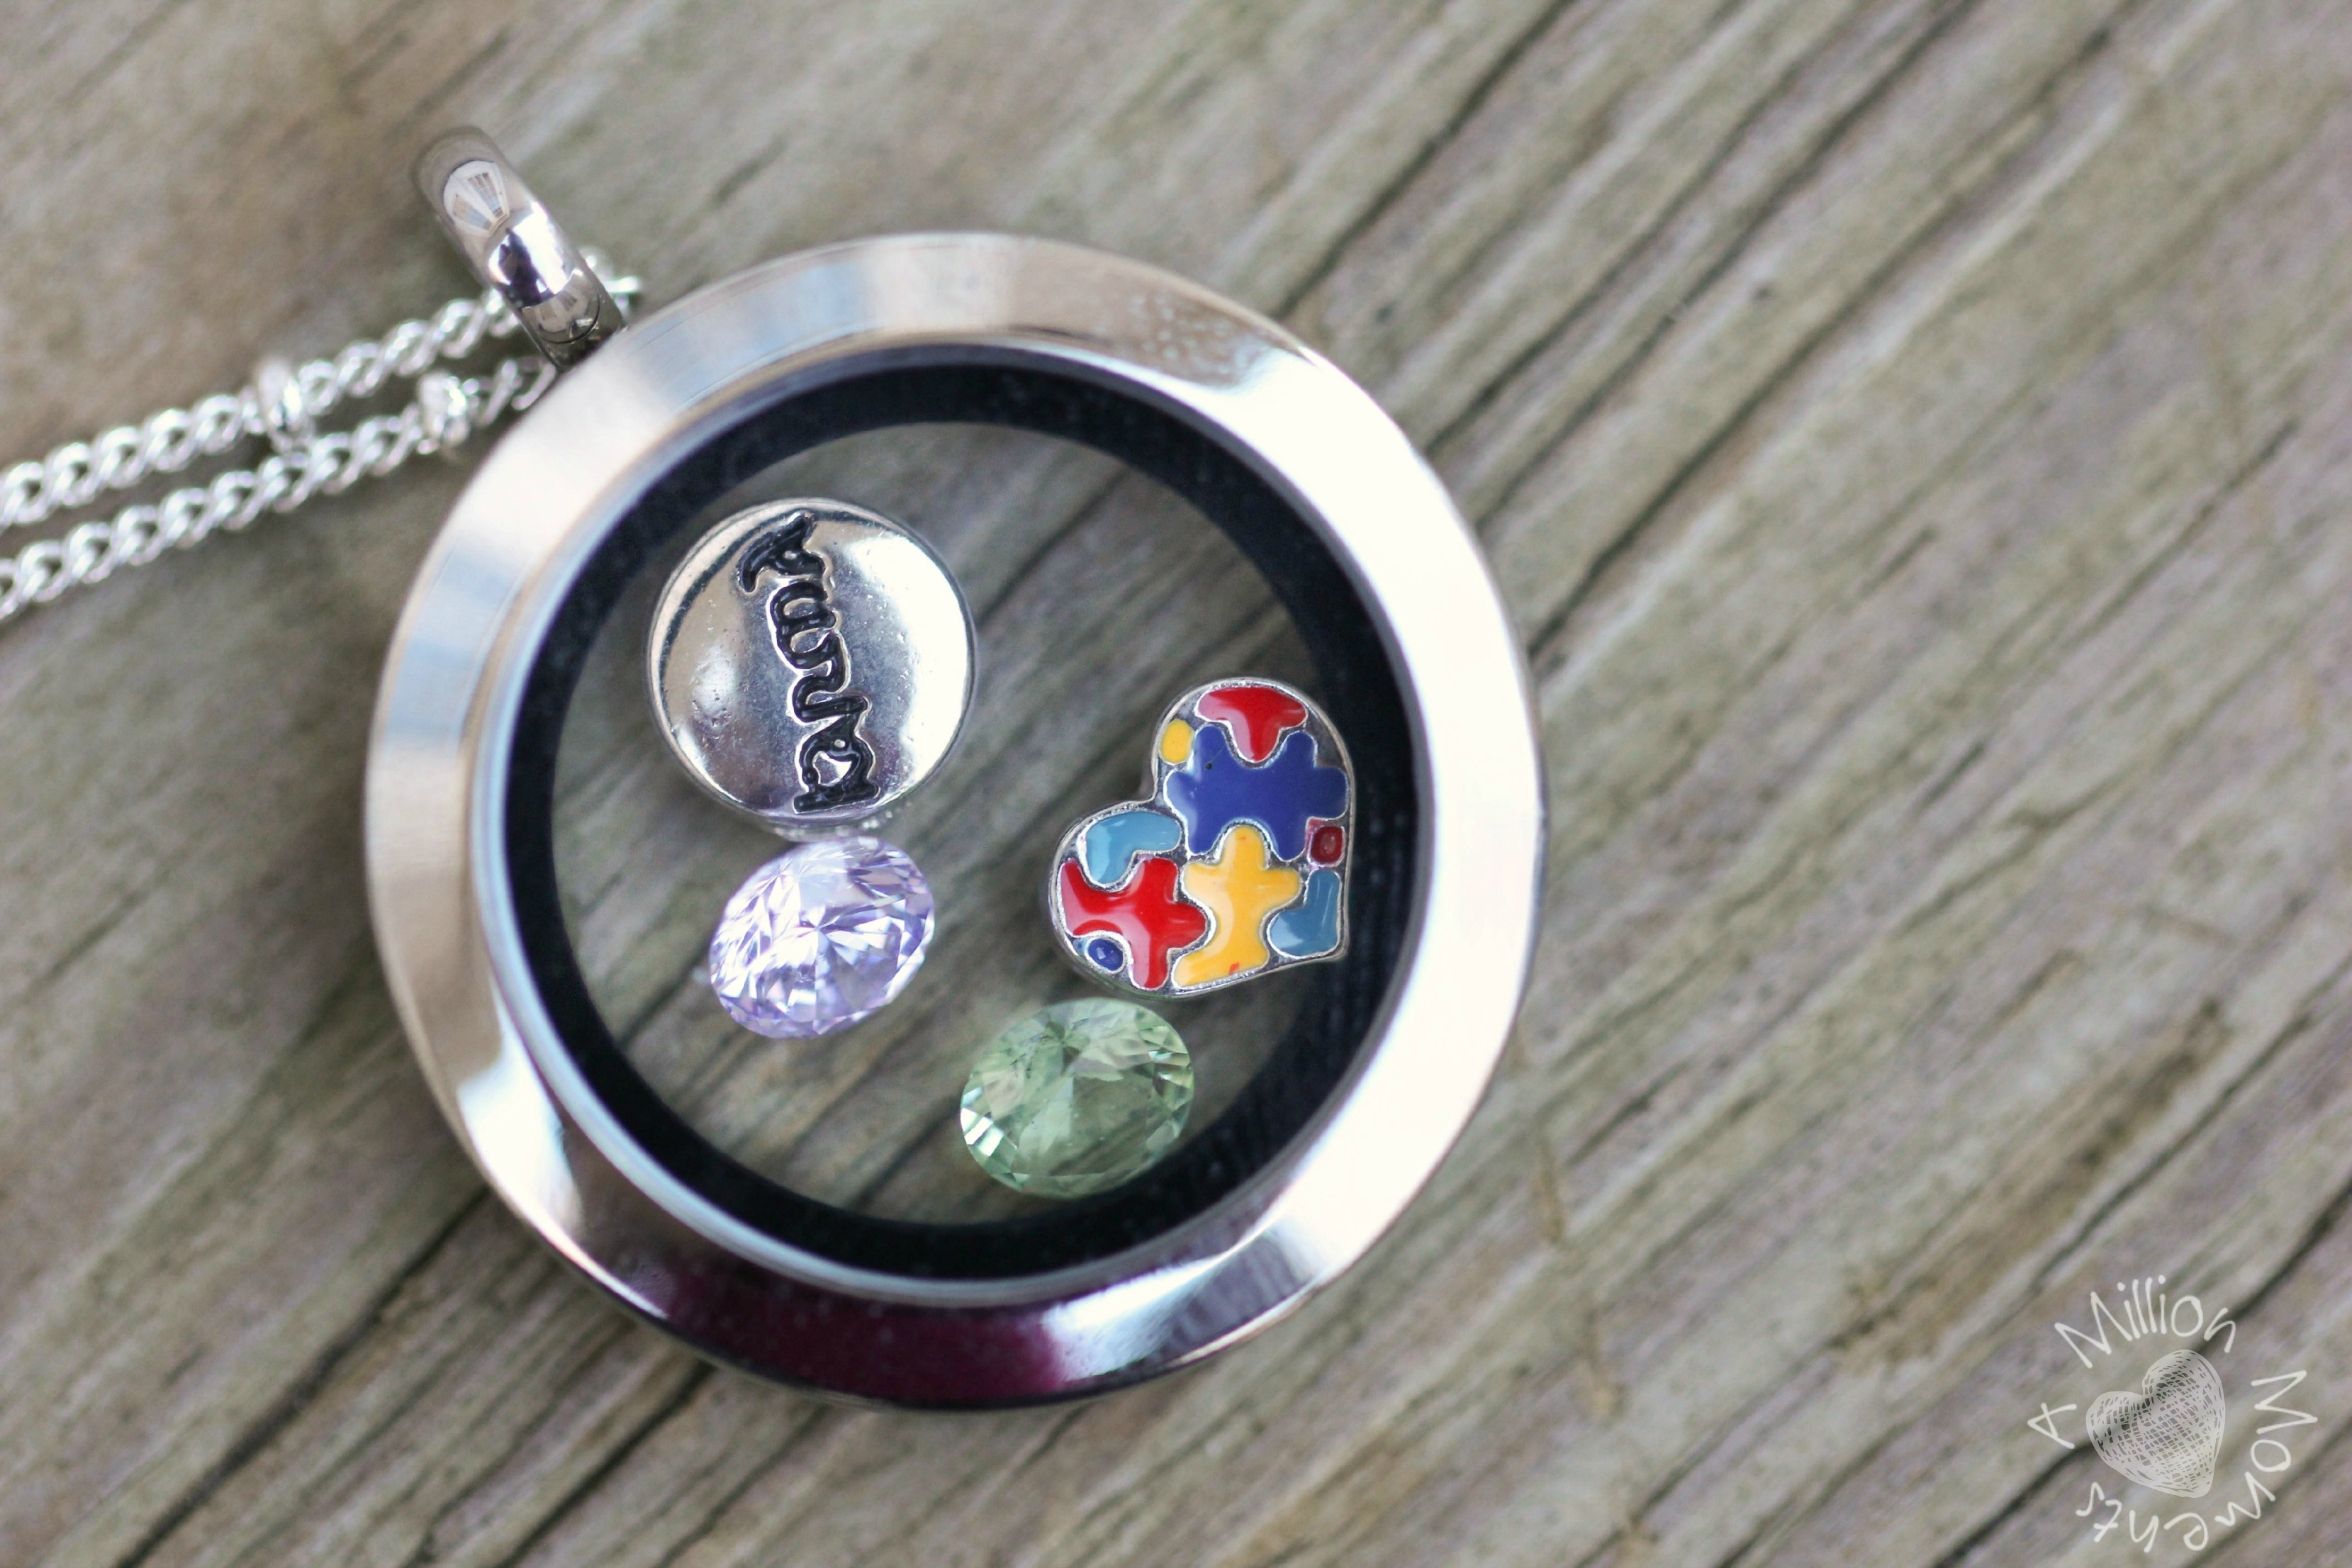 Origami Owl Ball Chain Origami Owl Living Lockets A Million Moments